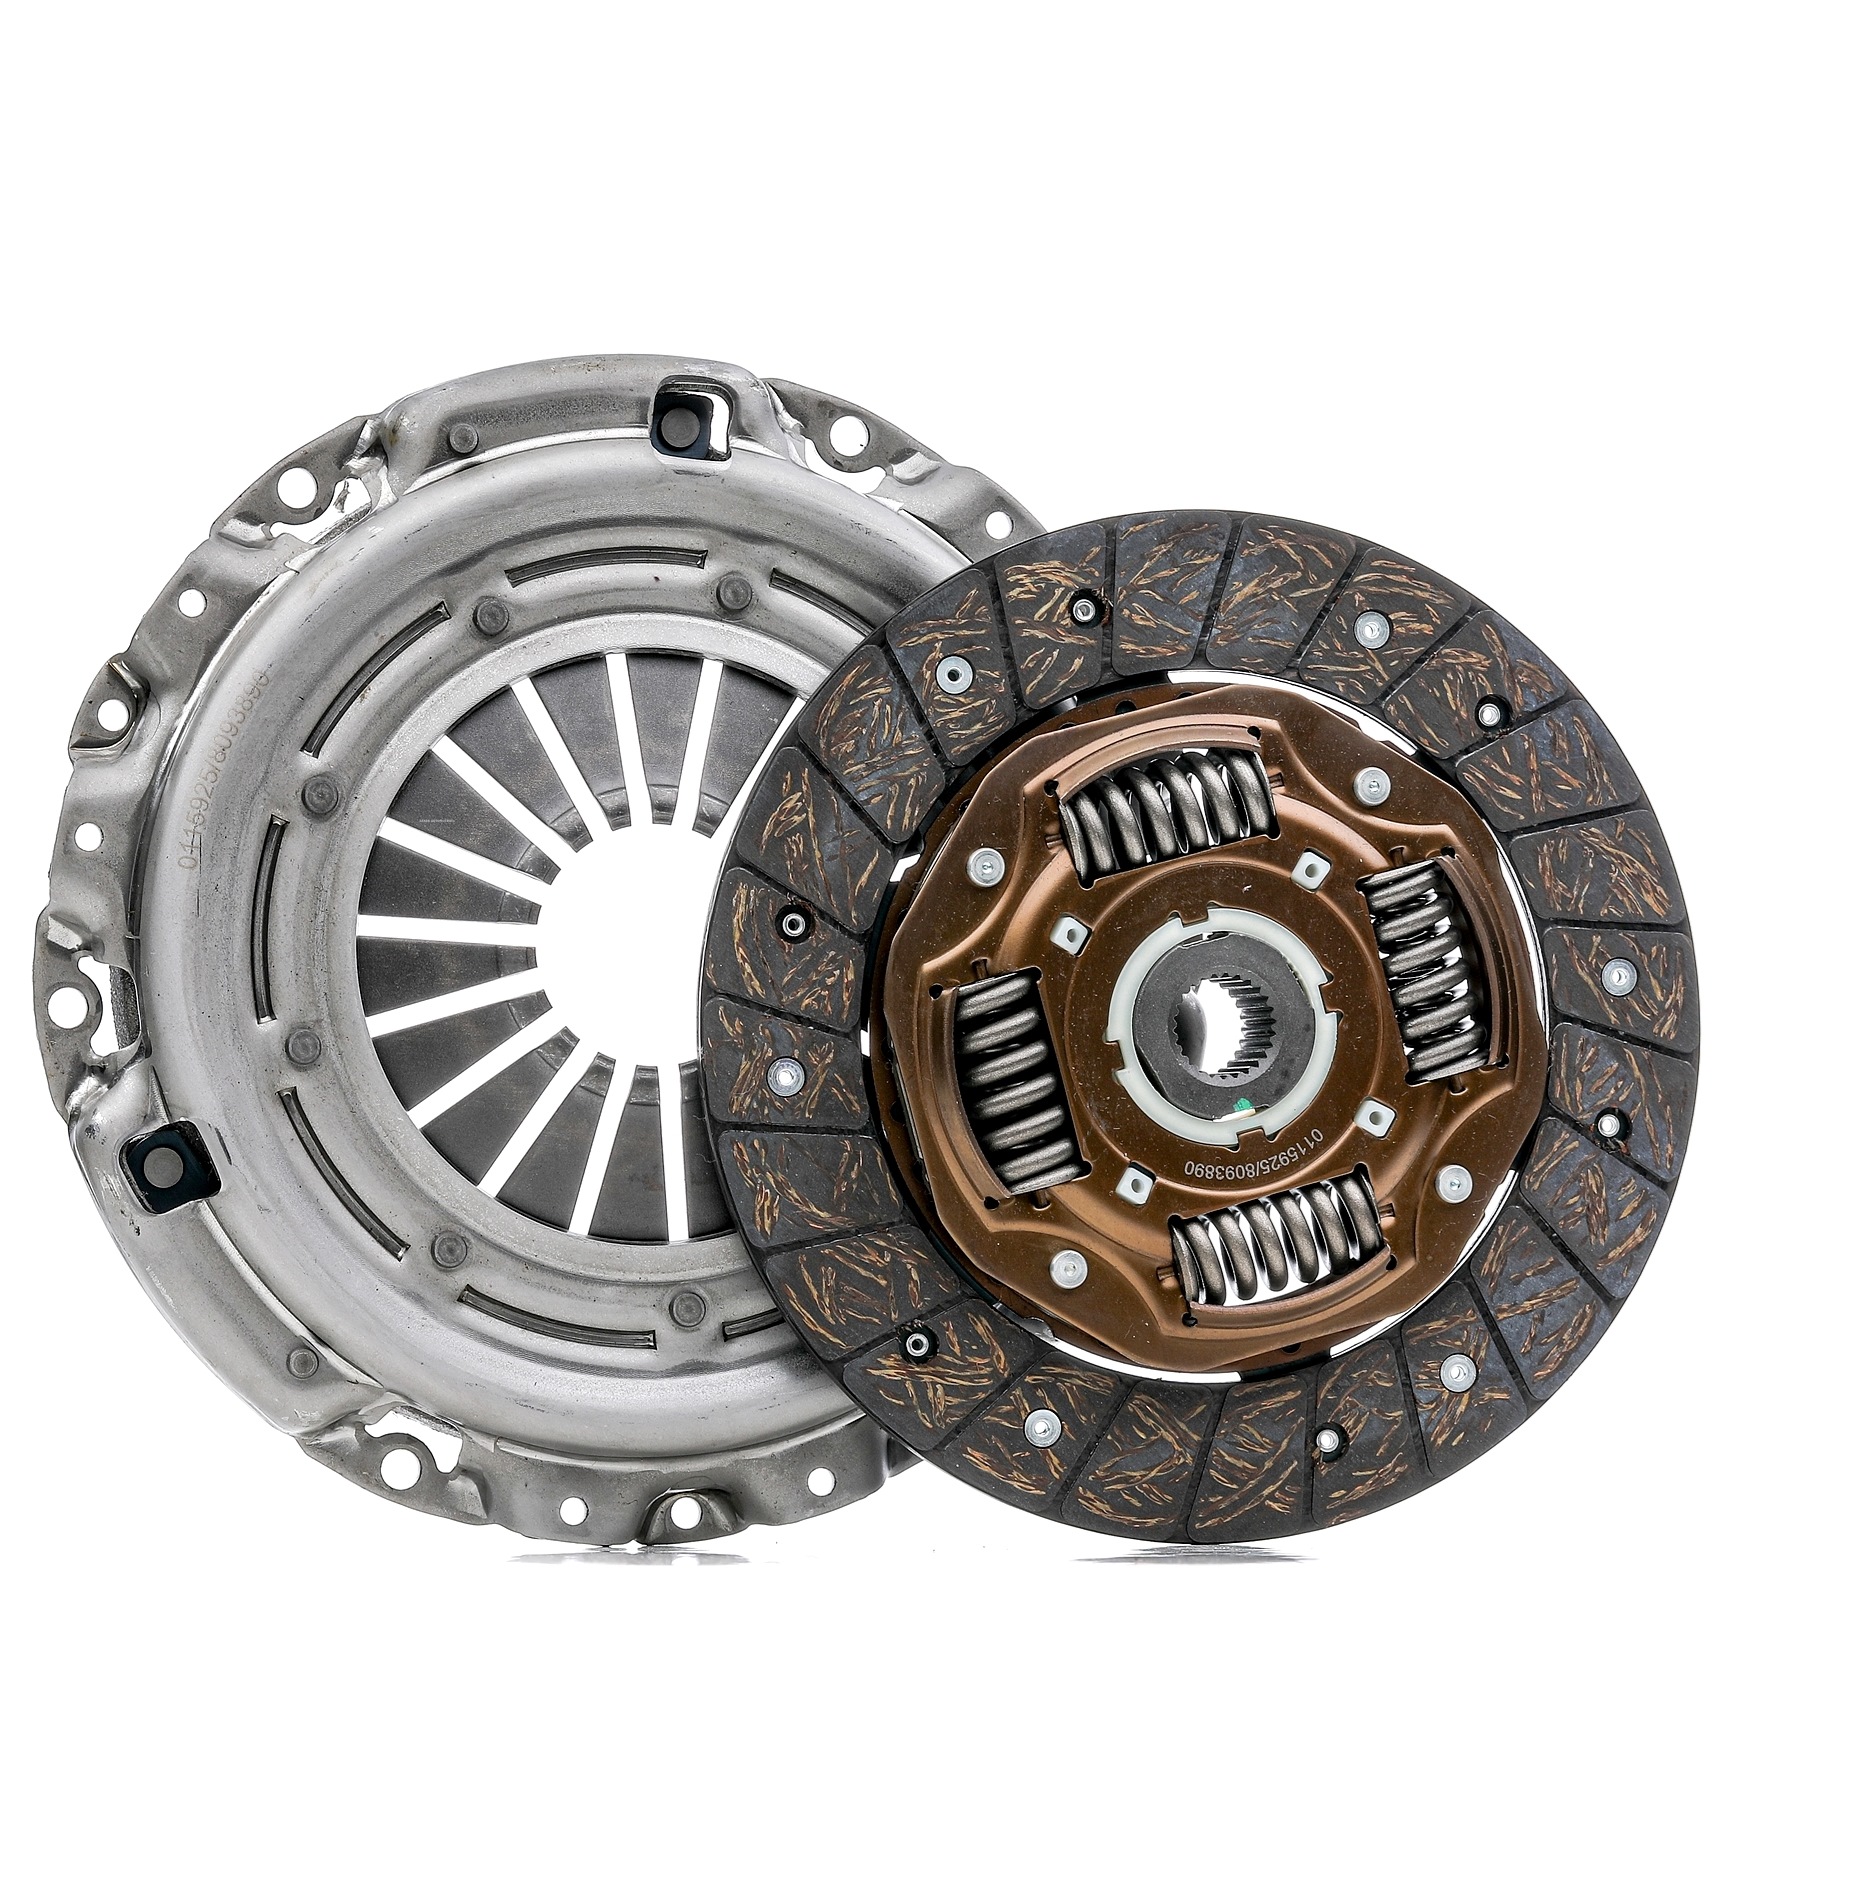 STARK SKCK-0100108 Clutch kit two-piece, with clutch pressure plate, without central slave cylinder, with clutch disc, without clutch release bearing, 215mm